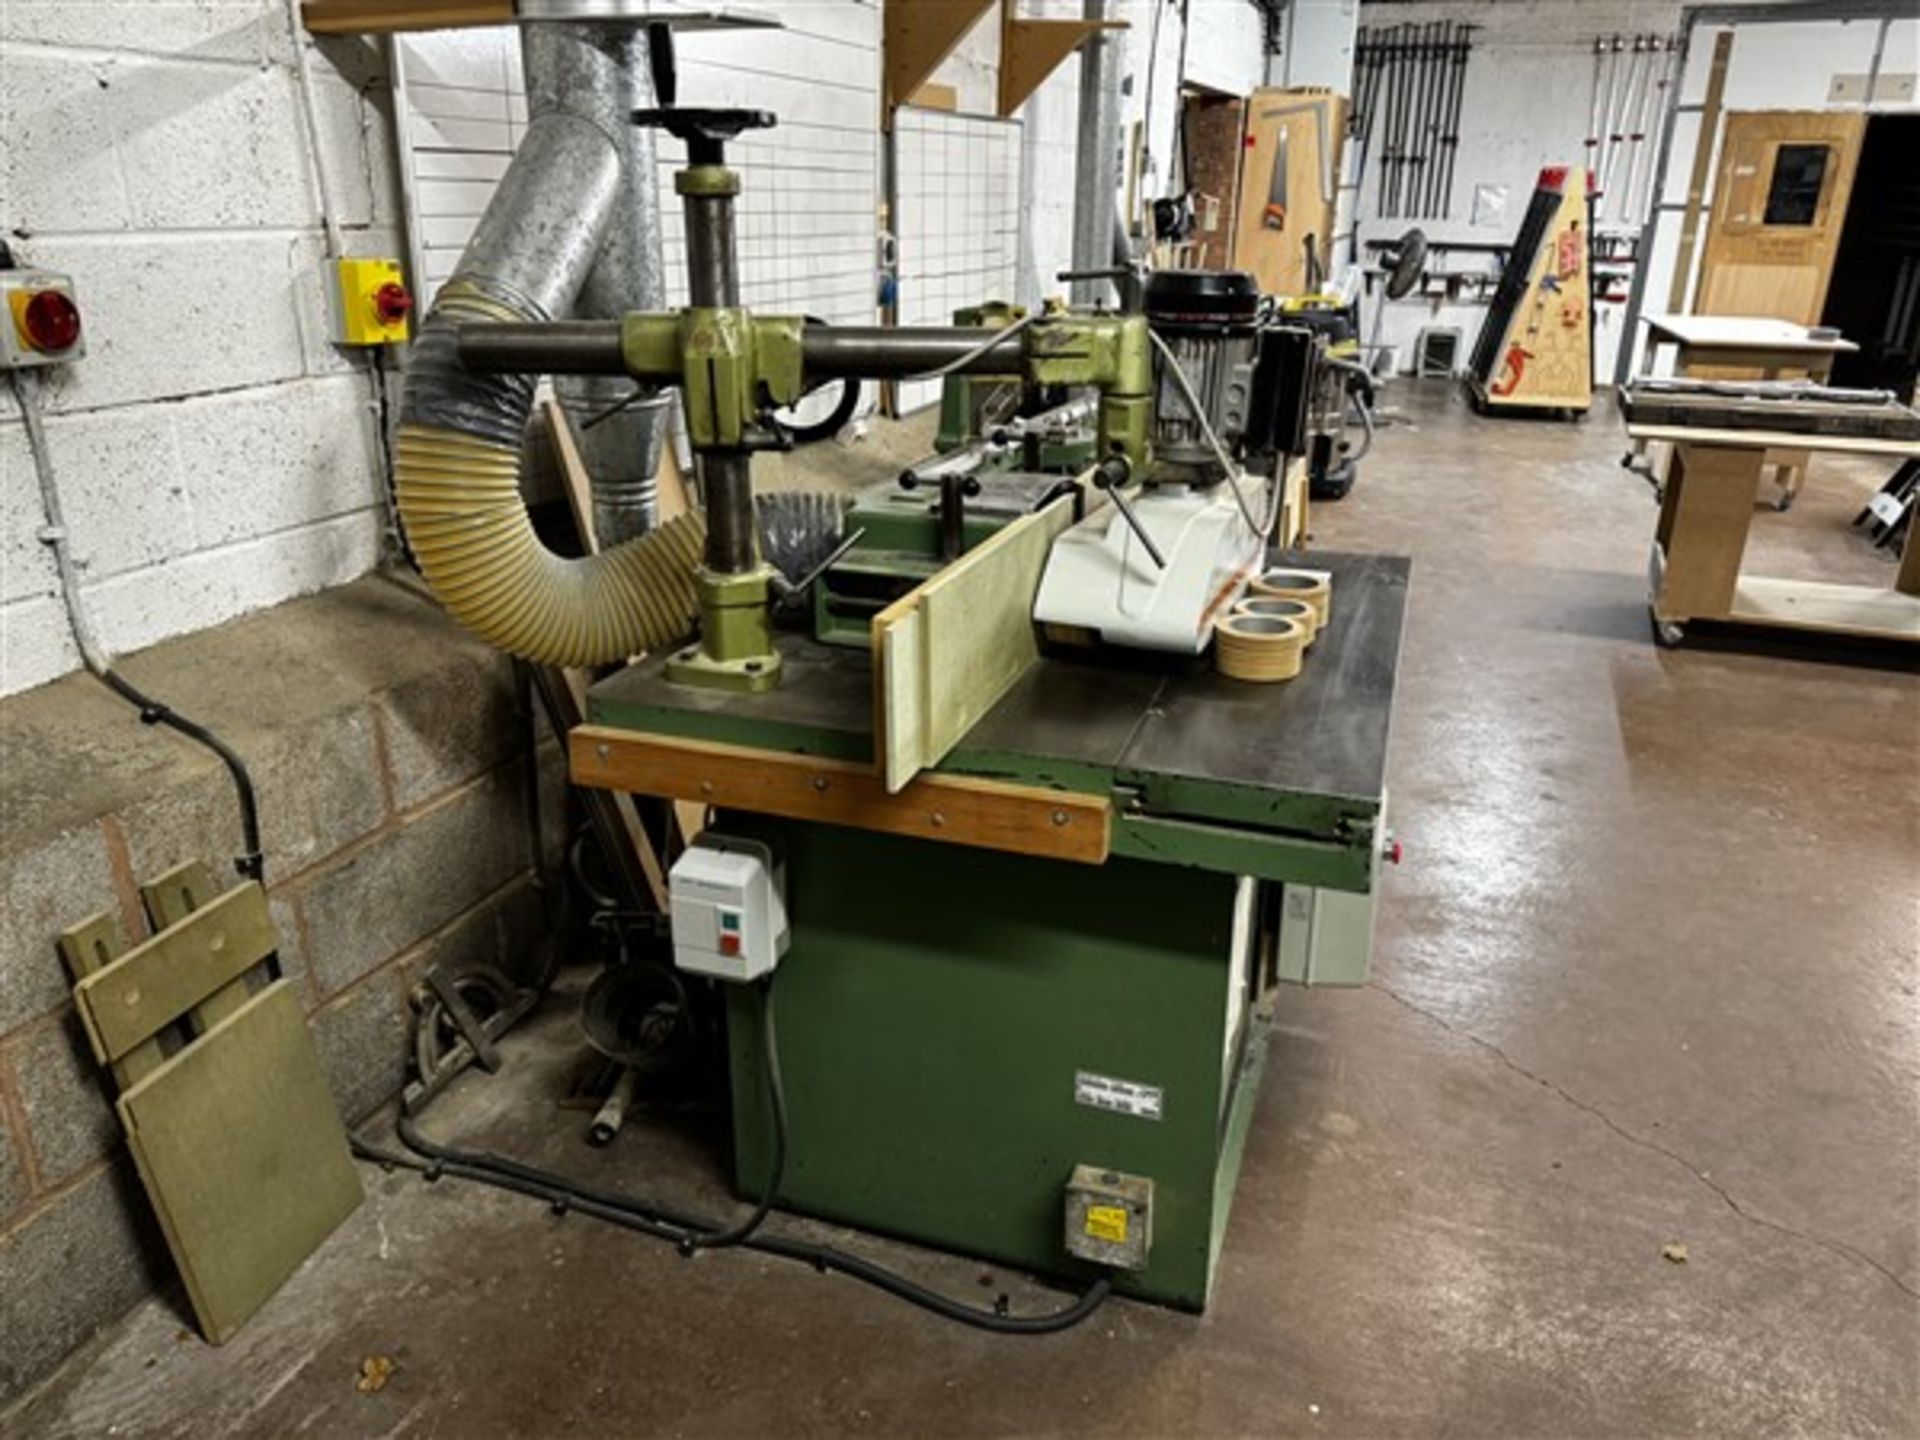 NMC spindle moulder, 380v, type F-115, serial no. 85/43/218, with Maggi feed unit, type 12720501, - Image 3 of 8